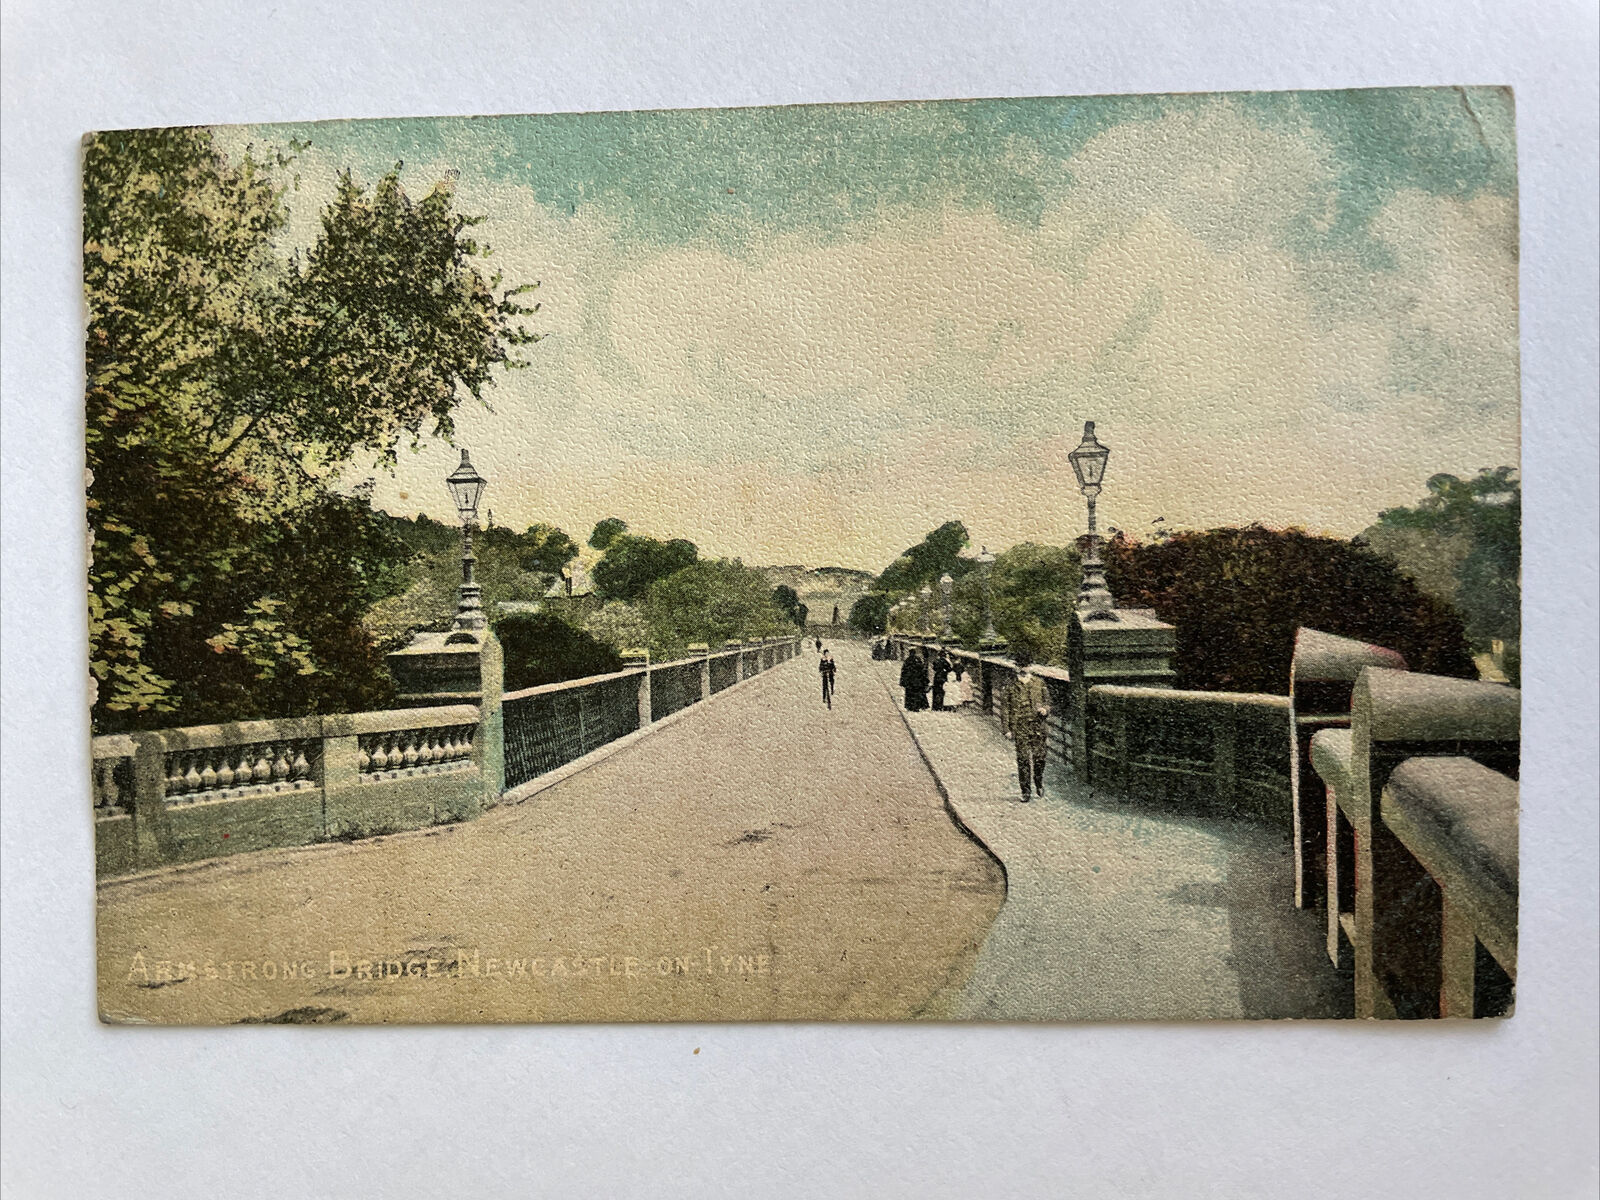 House Clearance - 1905 Antique Service Showing Armstrong Bridge, Newcastle-Upon-Tyne